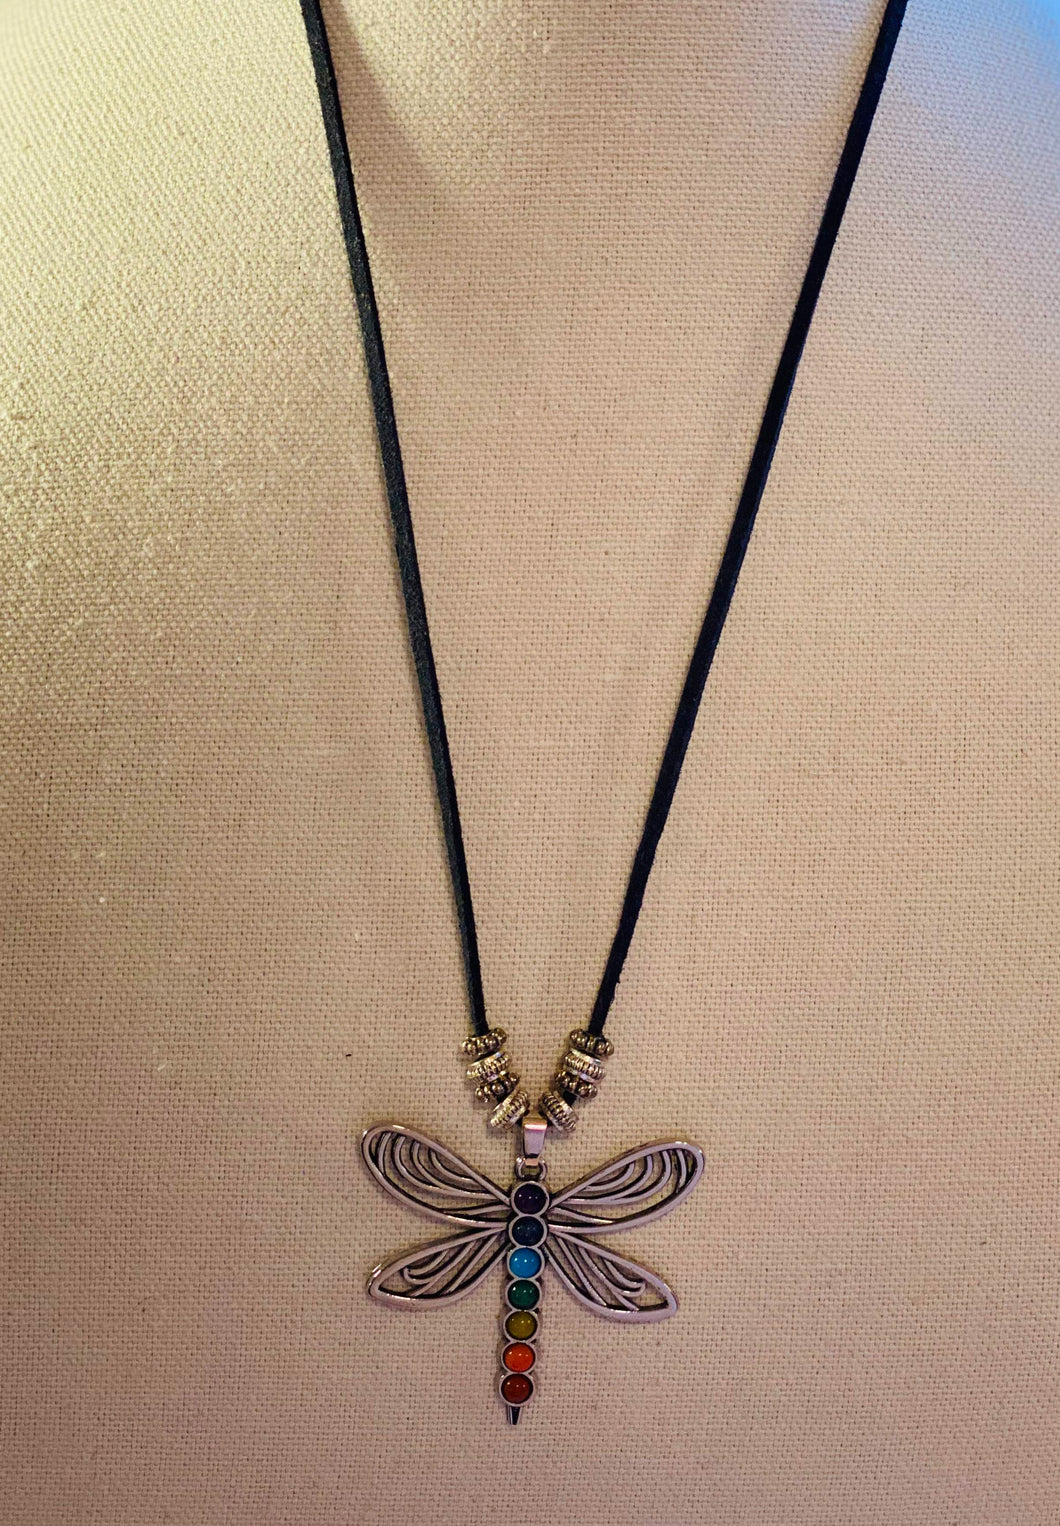 Dragonfly Chakra Necklace with Gemstones